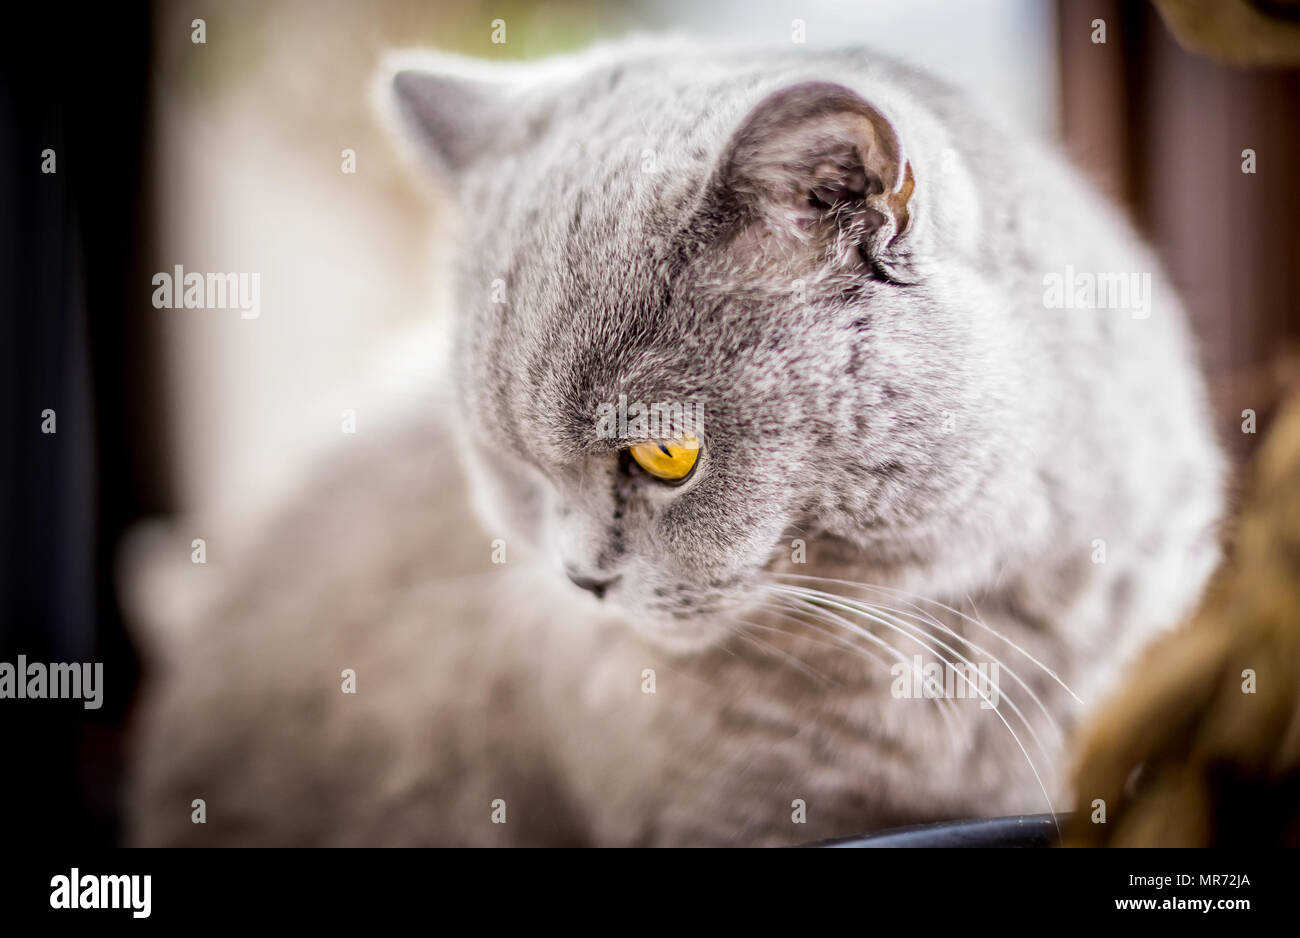 Portrait of British Shorthair cat with blue and grey fur. Shallow depth of field. Stock Photo